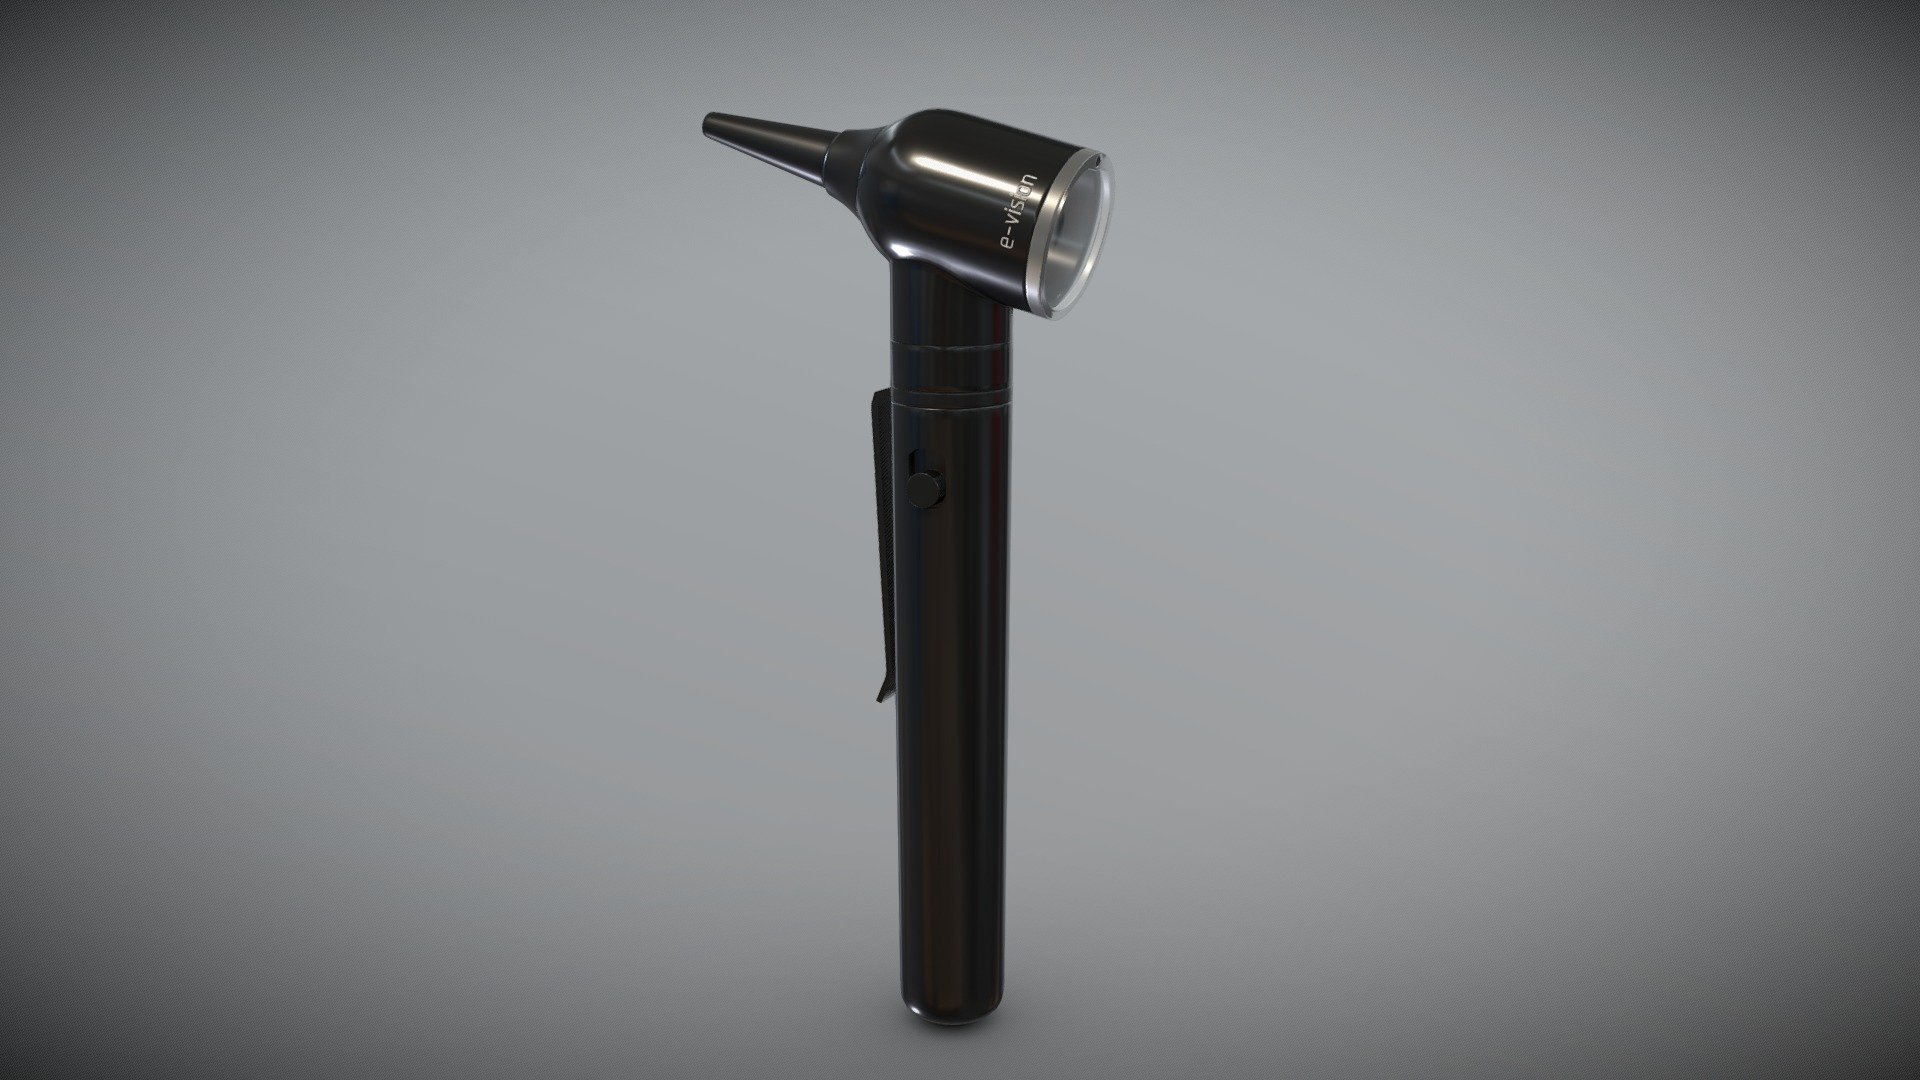 An otoscope or auriscope is a medical device which is used to look into the ears.[1] Health care providers use otoscopes to screen for illness during regular check-ups and also to investigate ear symptoms. An otoscope potentially gives a view of the ear canal and tympanic membrane or eardrum. Because the eardrum is the border separating the external ear canal from the middle ear, its characteristics can be indicative of various diseases of the middle ear space. The presence of earwax (cerumen), shed skin, pus, canal skin edema, foreign body, and various ear diseases can obscure any view of the eardrum and thus severely compromise the value of otoscopy done with a common otoscope.
(Wikipedia)

Modeled in 3ds max 2022 and textured in Substance Painter 3d model